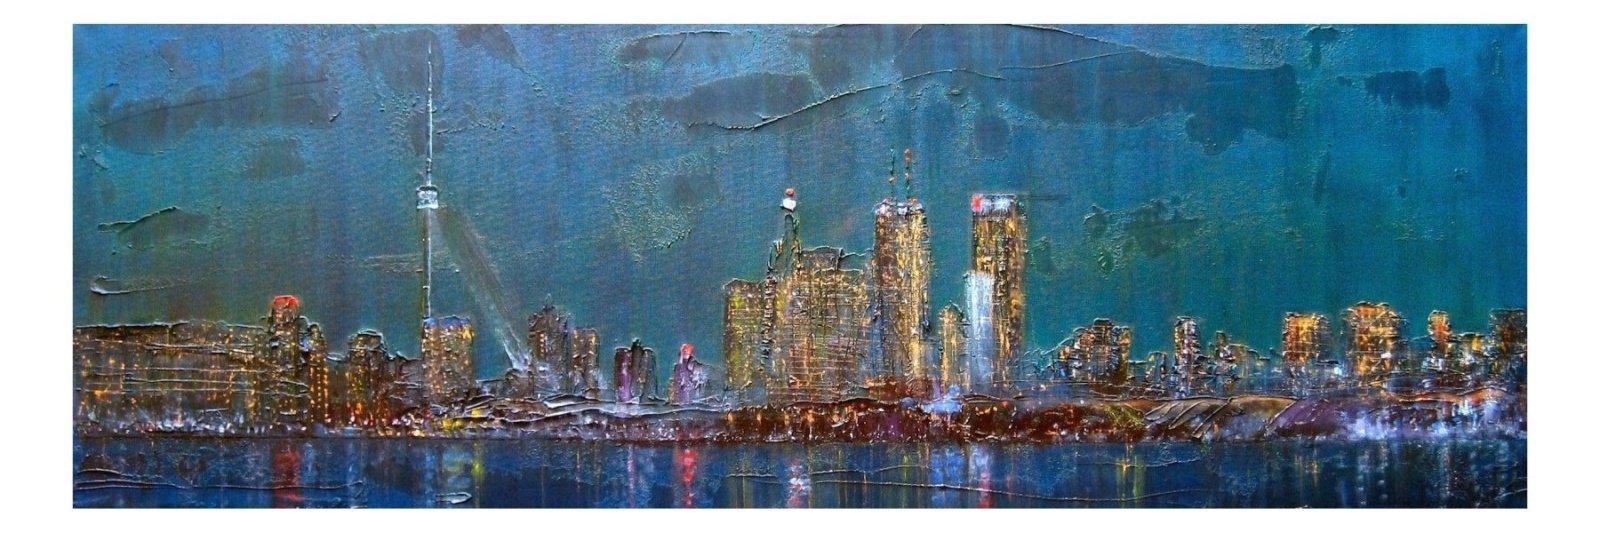 Toronto Nights-Panoramic Prints-World Art Gallery-Paintings, Prints, Homeware, Art Gifts From Scotland By Scottish Artist Kevin Hunter